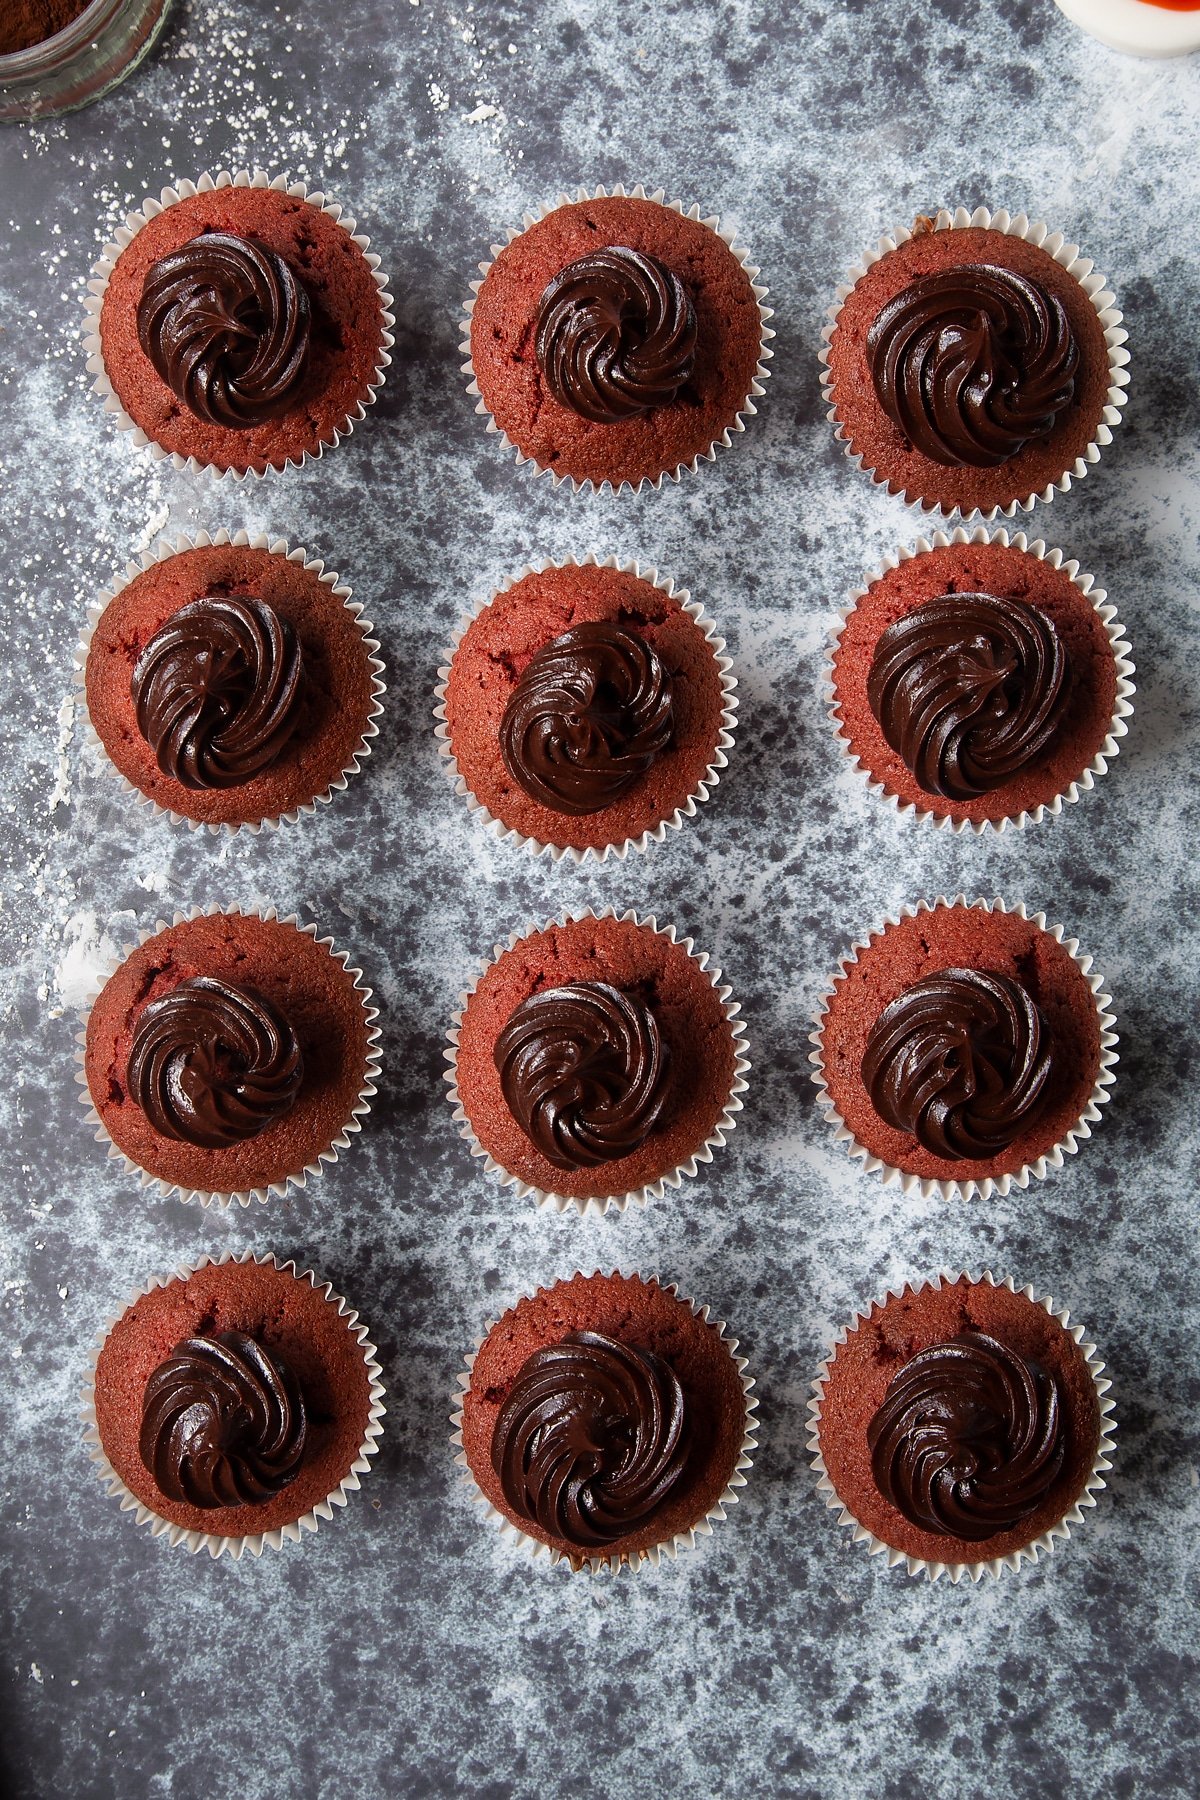 12 red velvet cupcakes toped with small swirls of chocolate frosting.